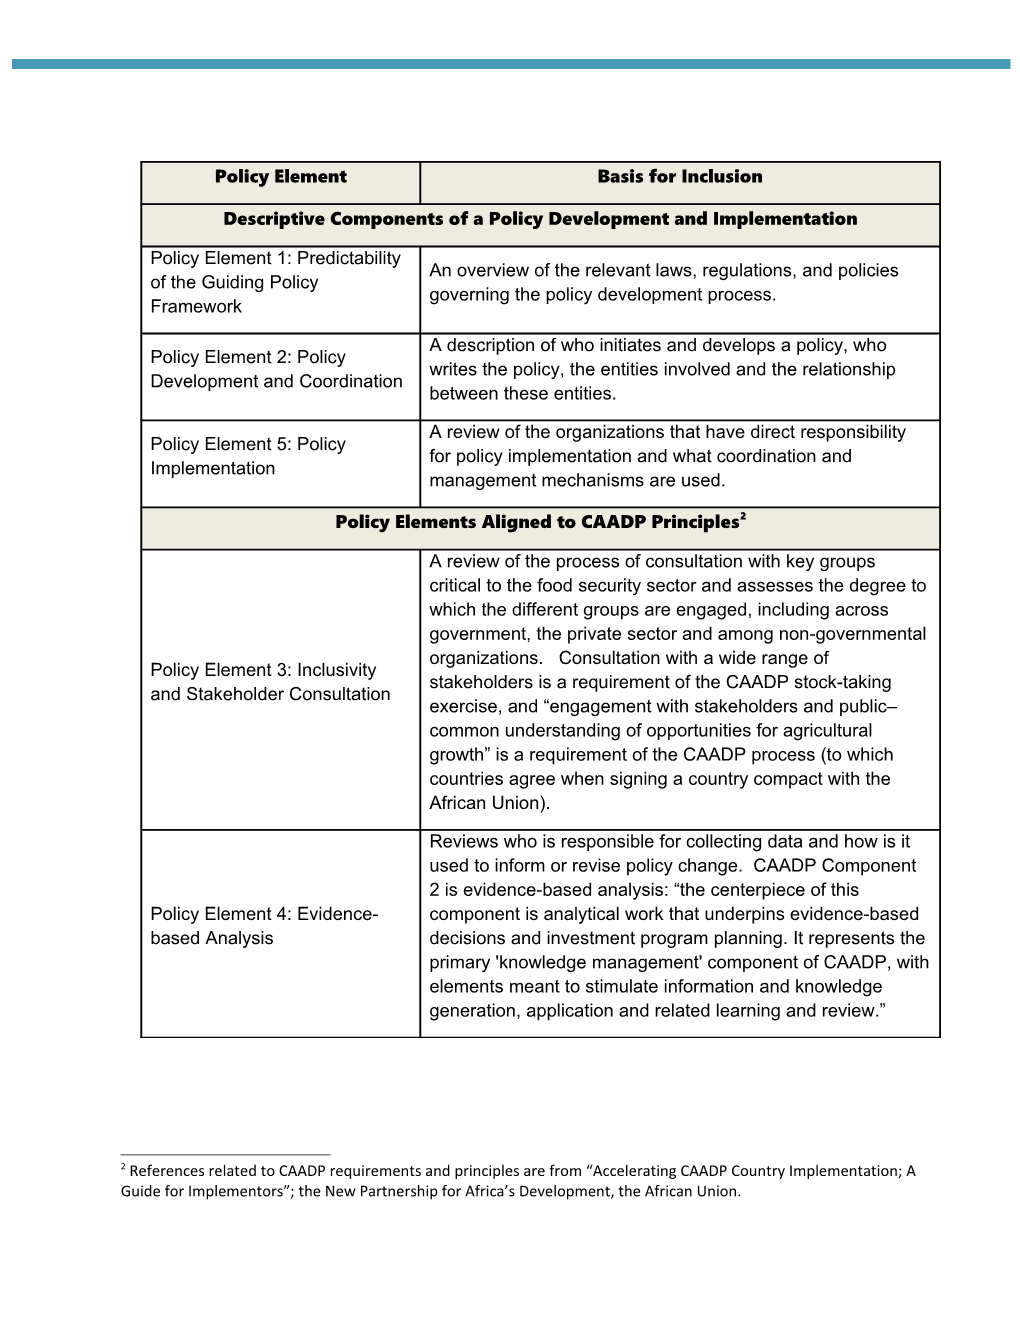 Institutional Architecture Assessment for Food Security Policy Change: Background Information 1